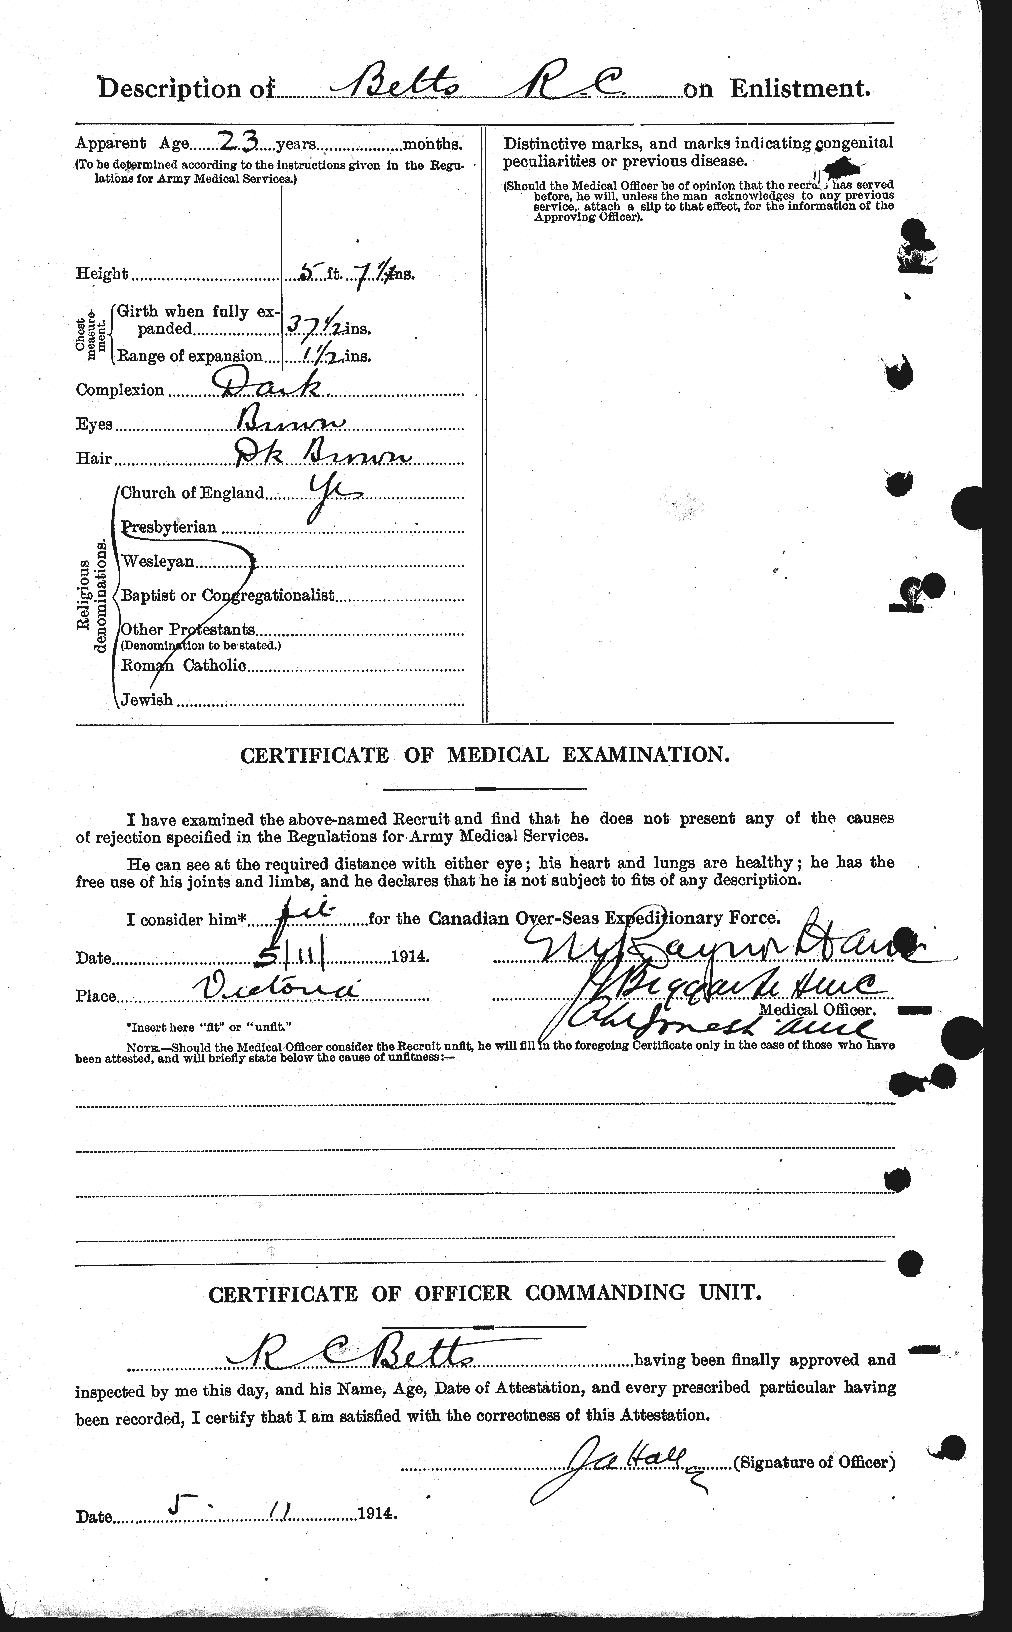 Personnel Records of the First World War - CEF 237190b